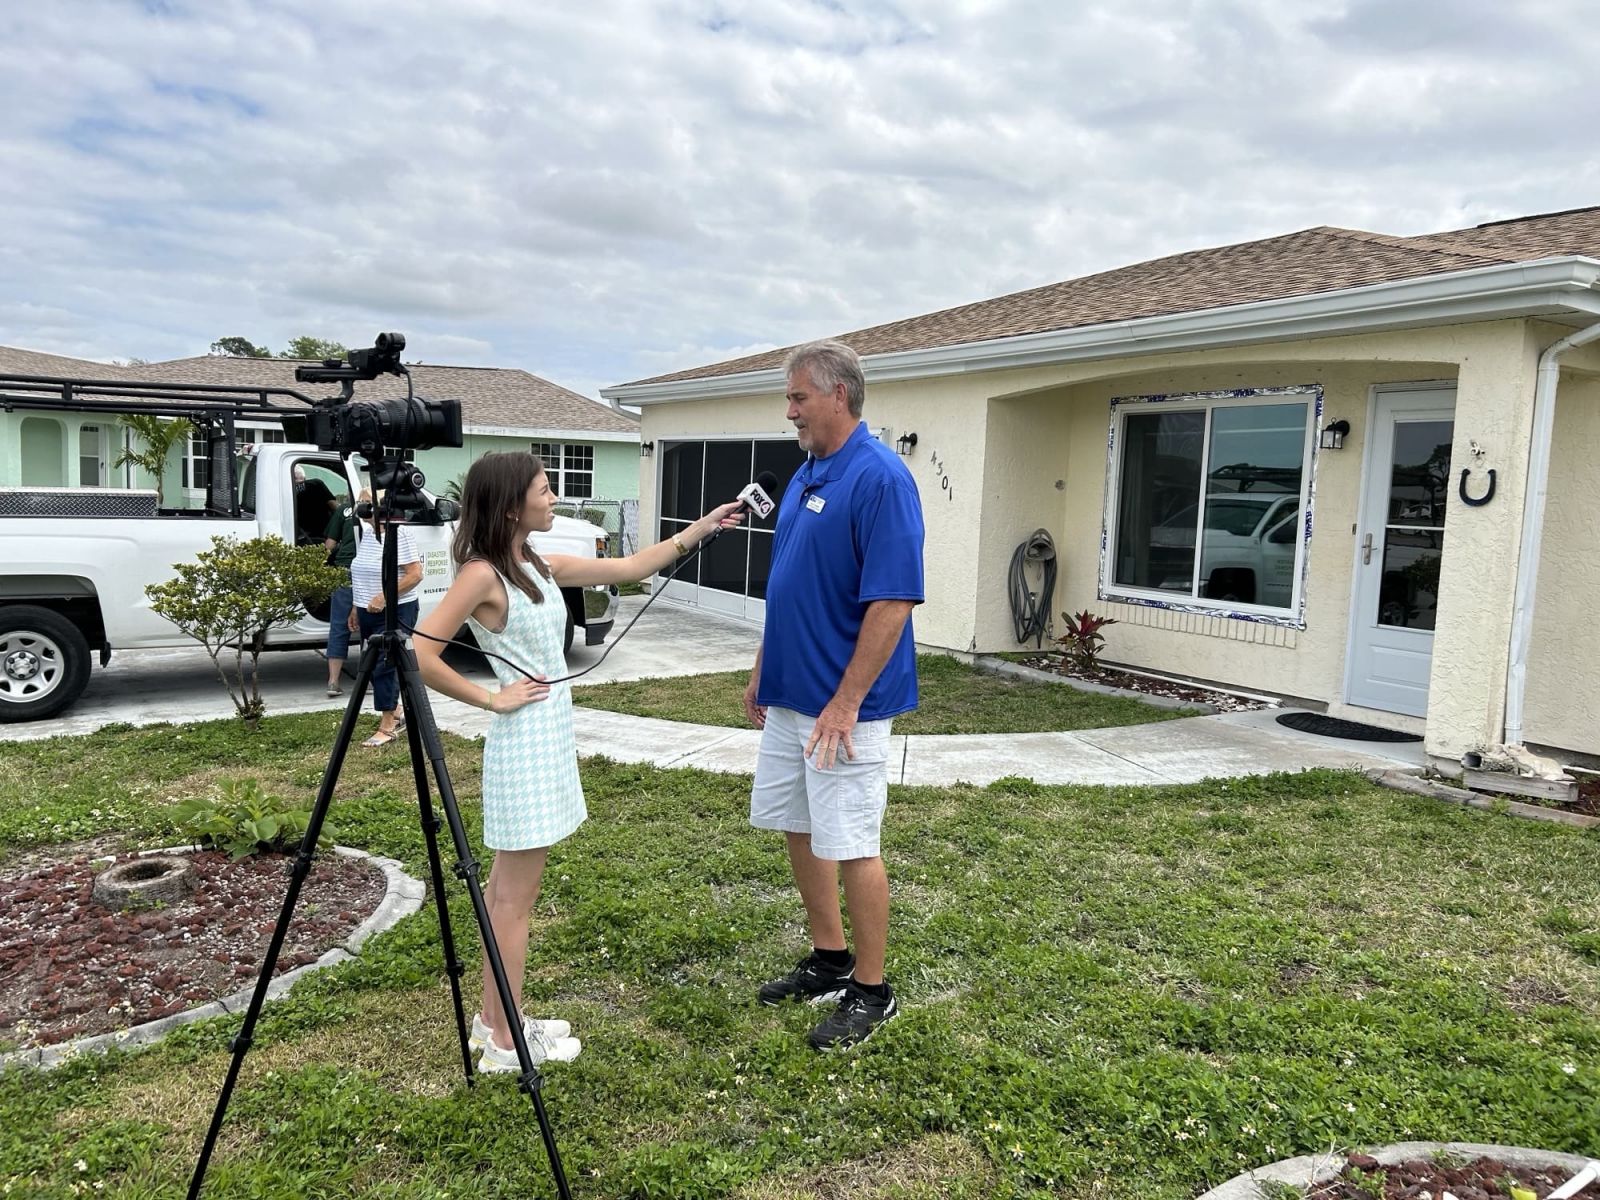 Fox 4’s Victoria Scott interviewed LTRG’s John Livingston, director of construction with the Sarasota County’s Long-Term Recovery Group as the team, working with World Renew, was able to help a woman back into her home for the first time since Ian.